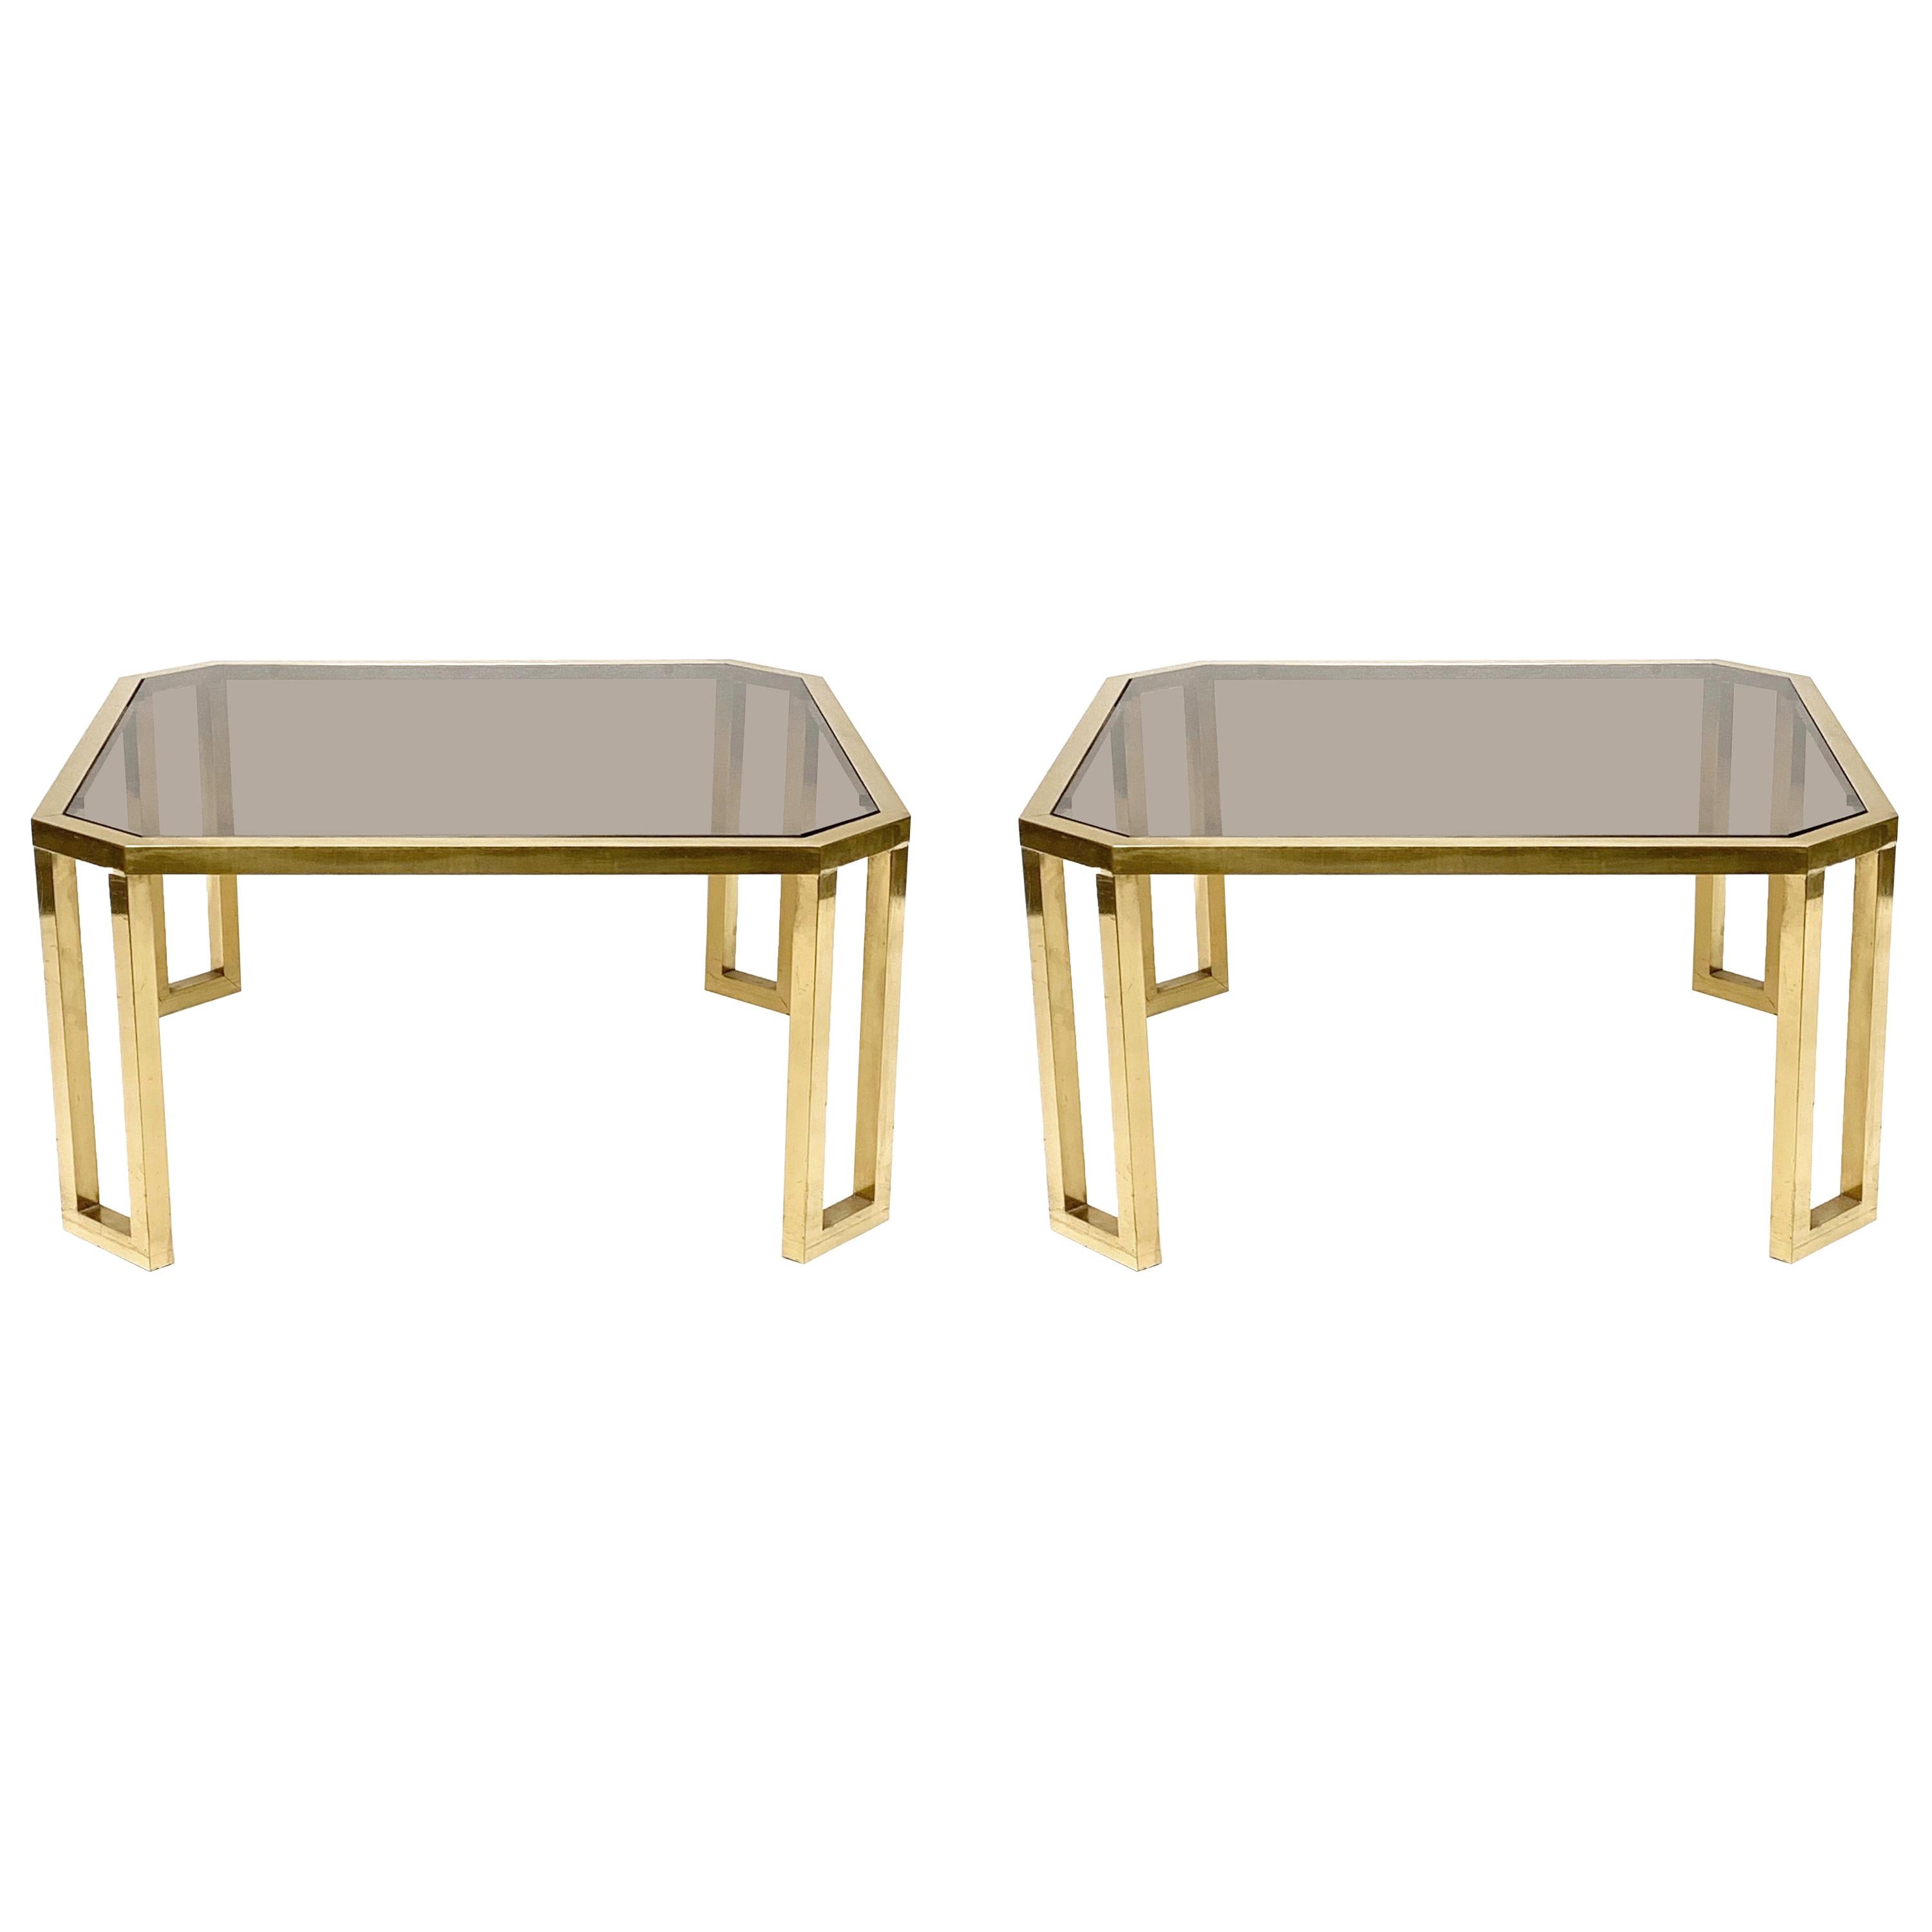 Maison Jansen Octagonal Tables in Brass and Glass, France, 1970s Coffee Tables